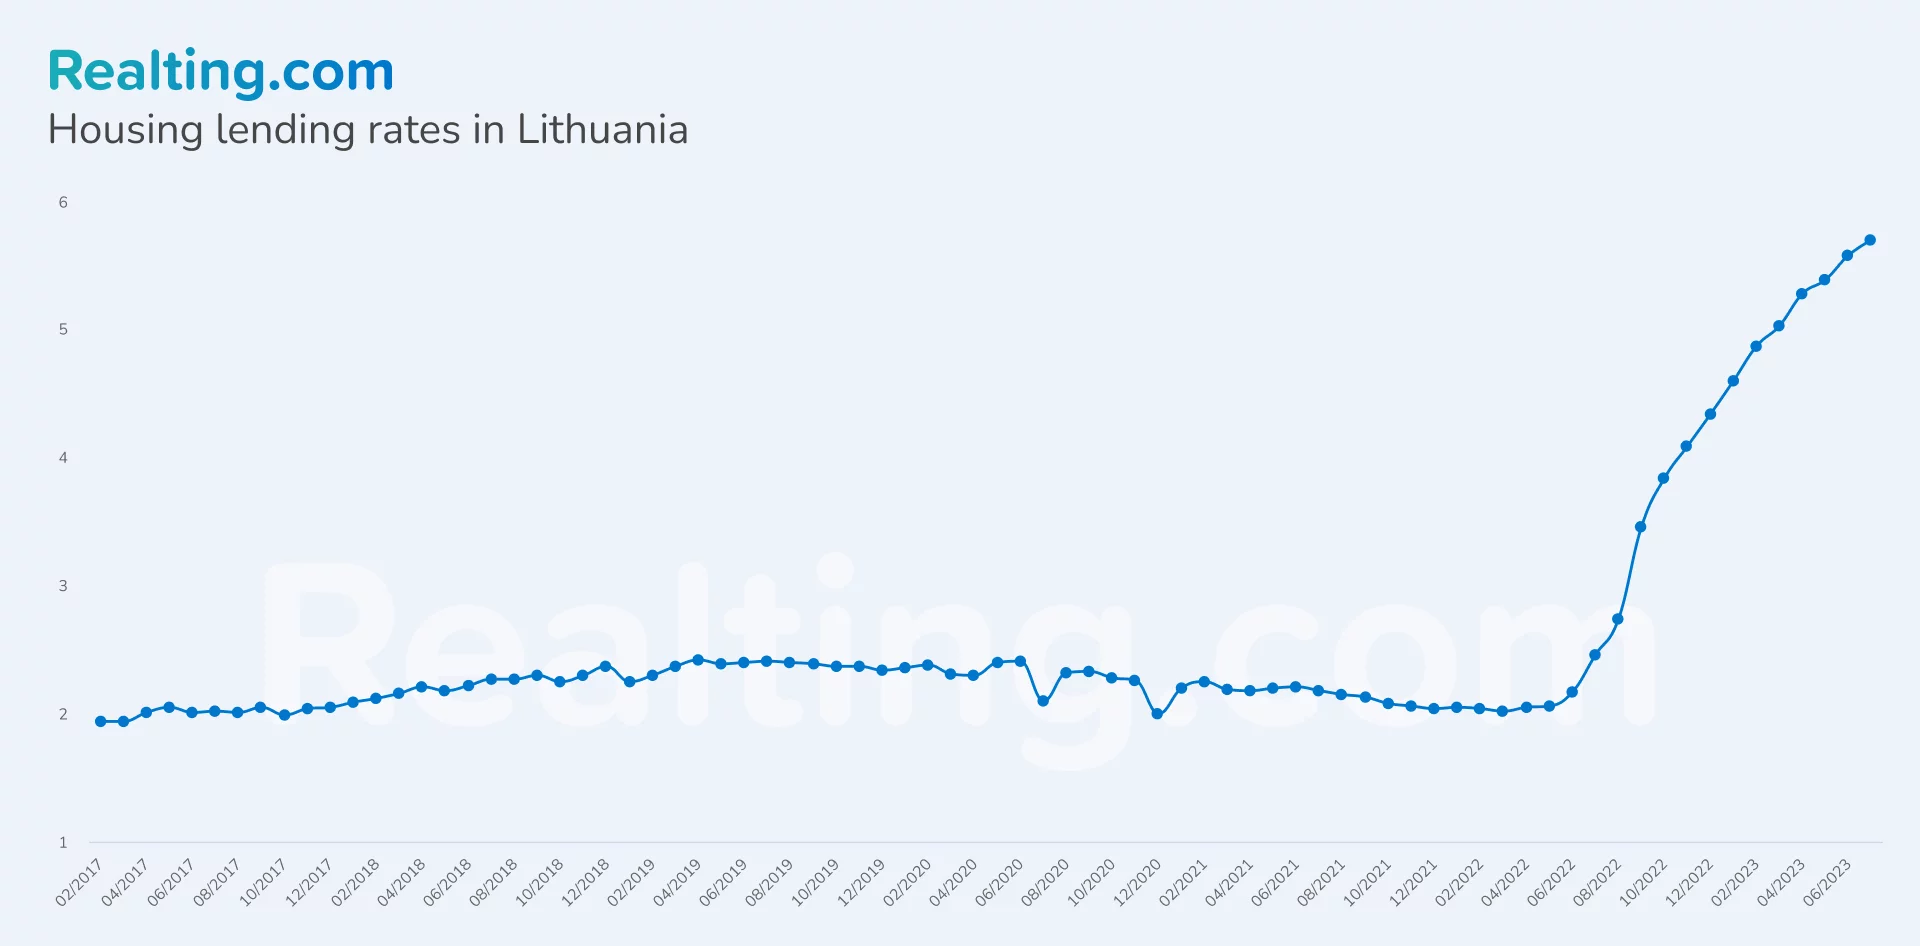 Mortgage rates in Lithuania